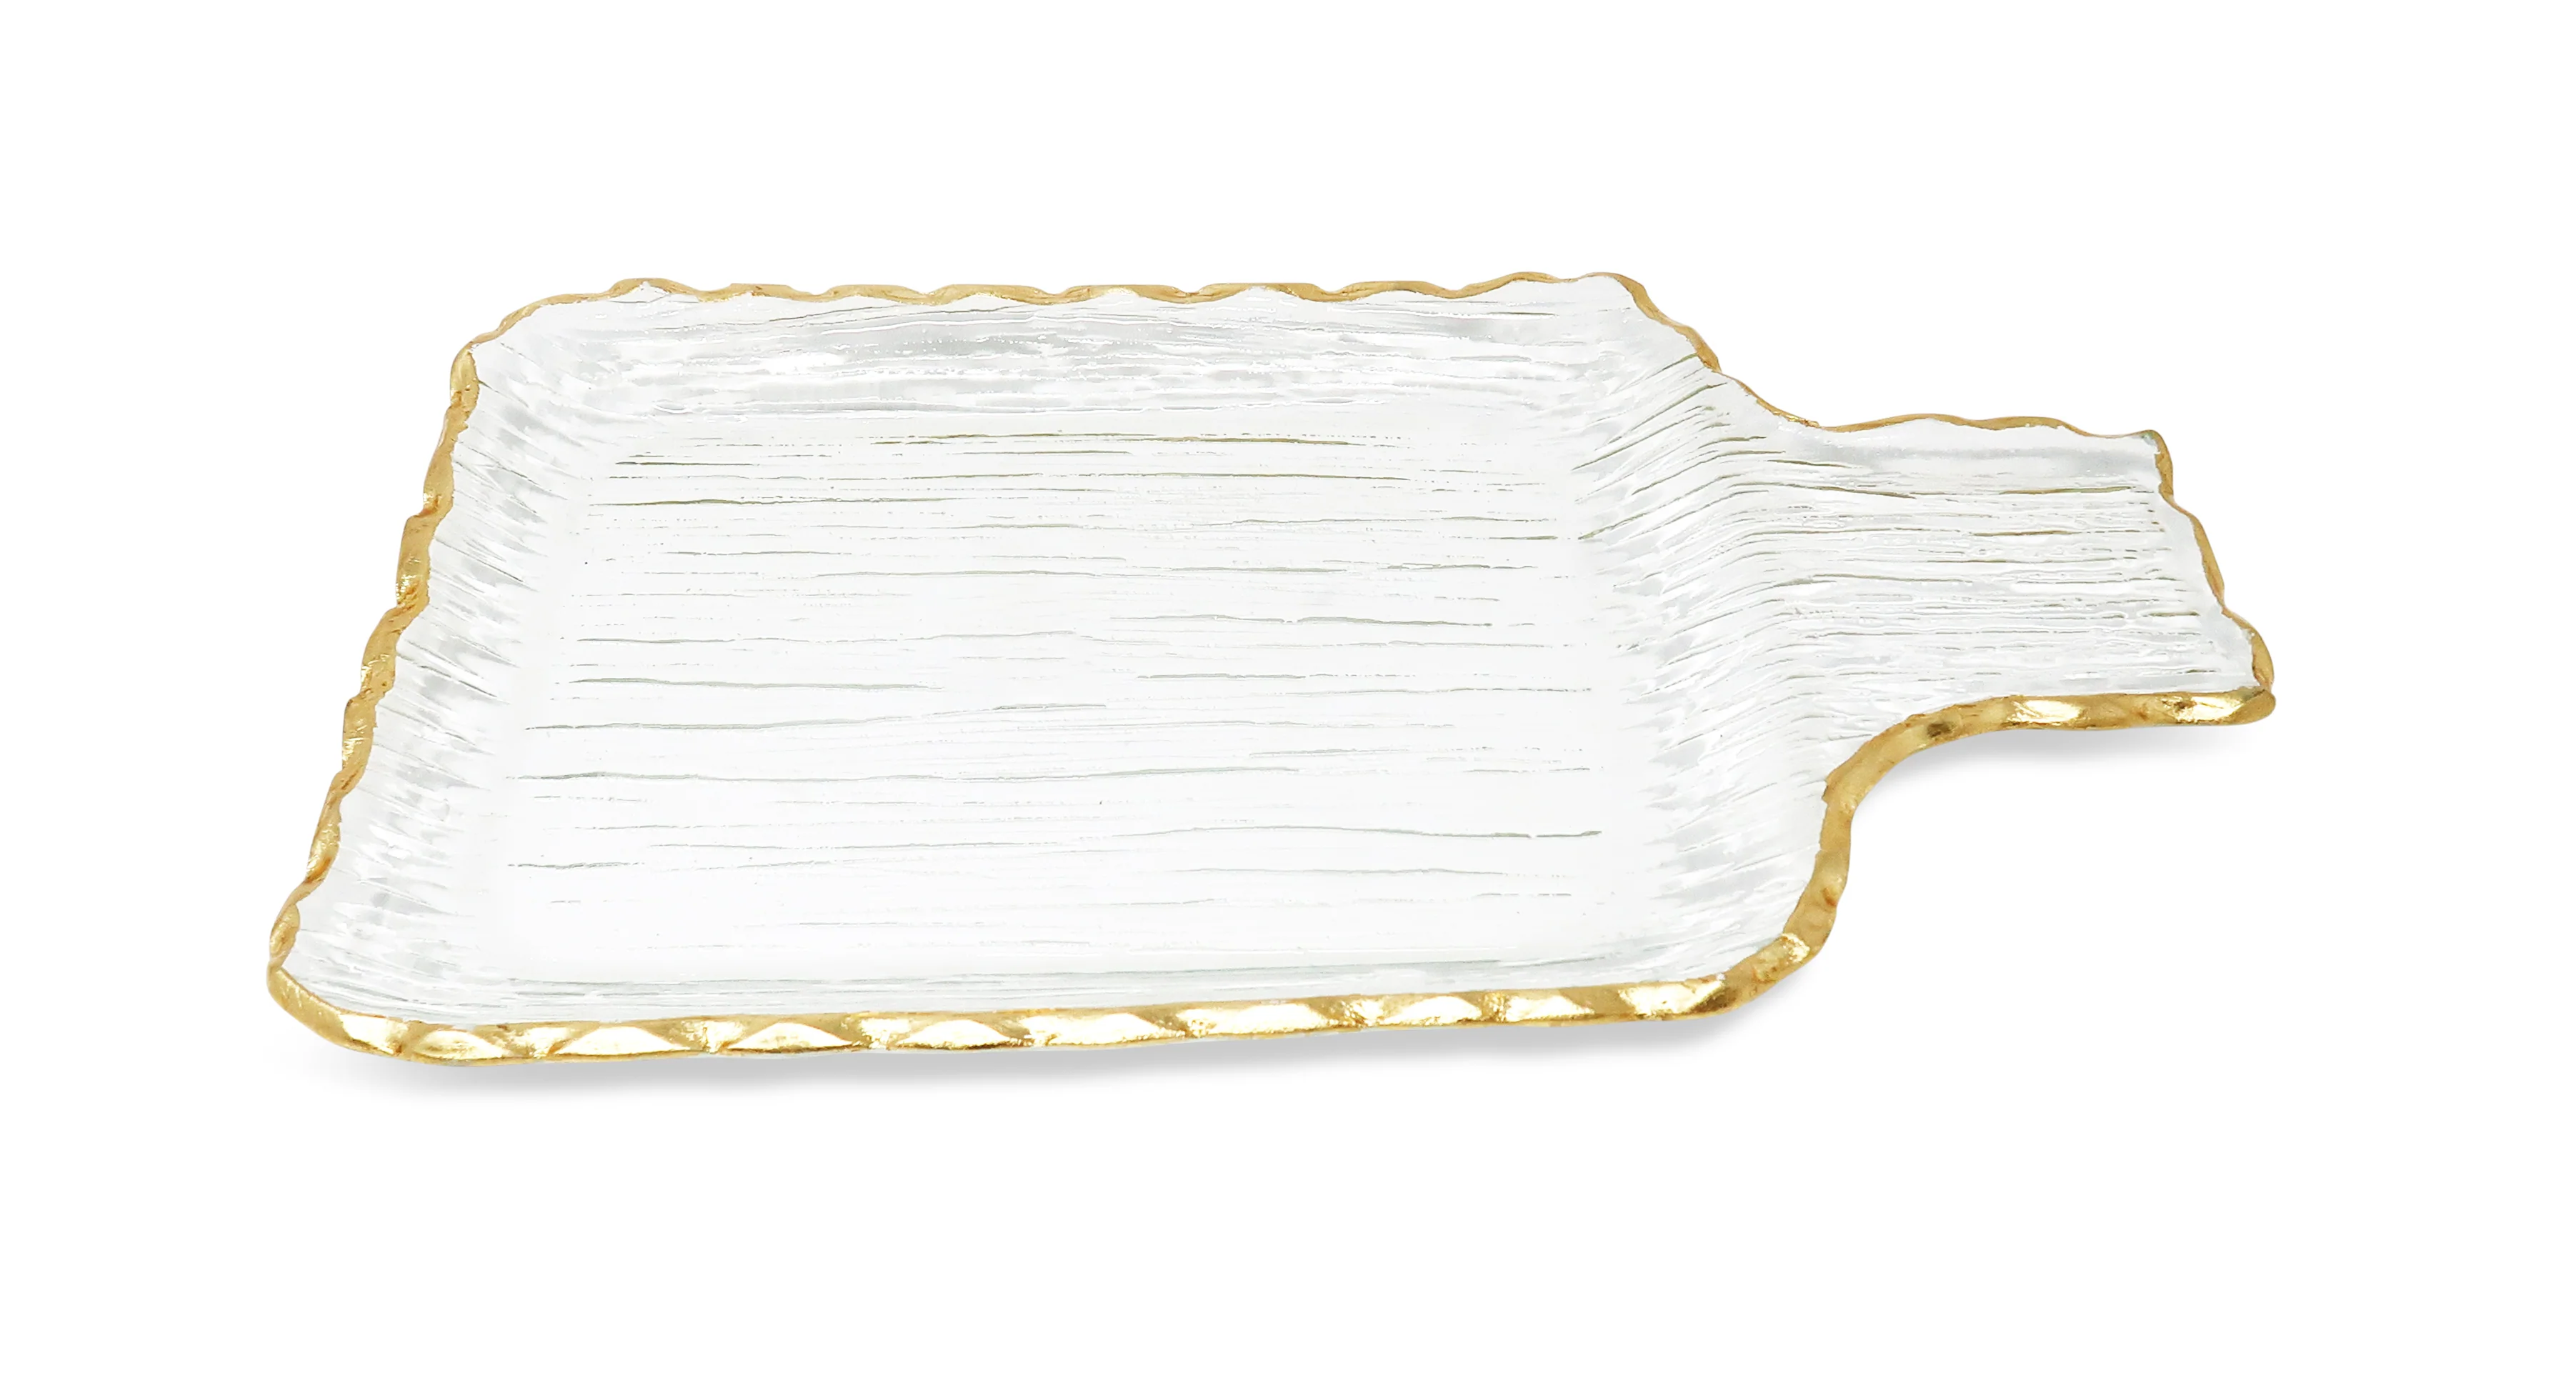 Glass Square Tray with Gold Boarder Small Size